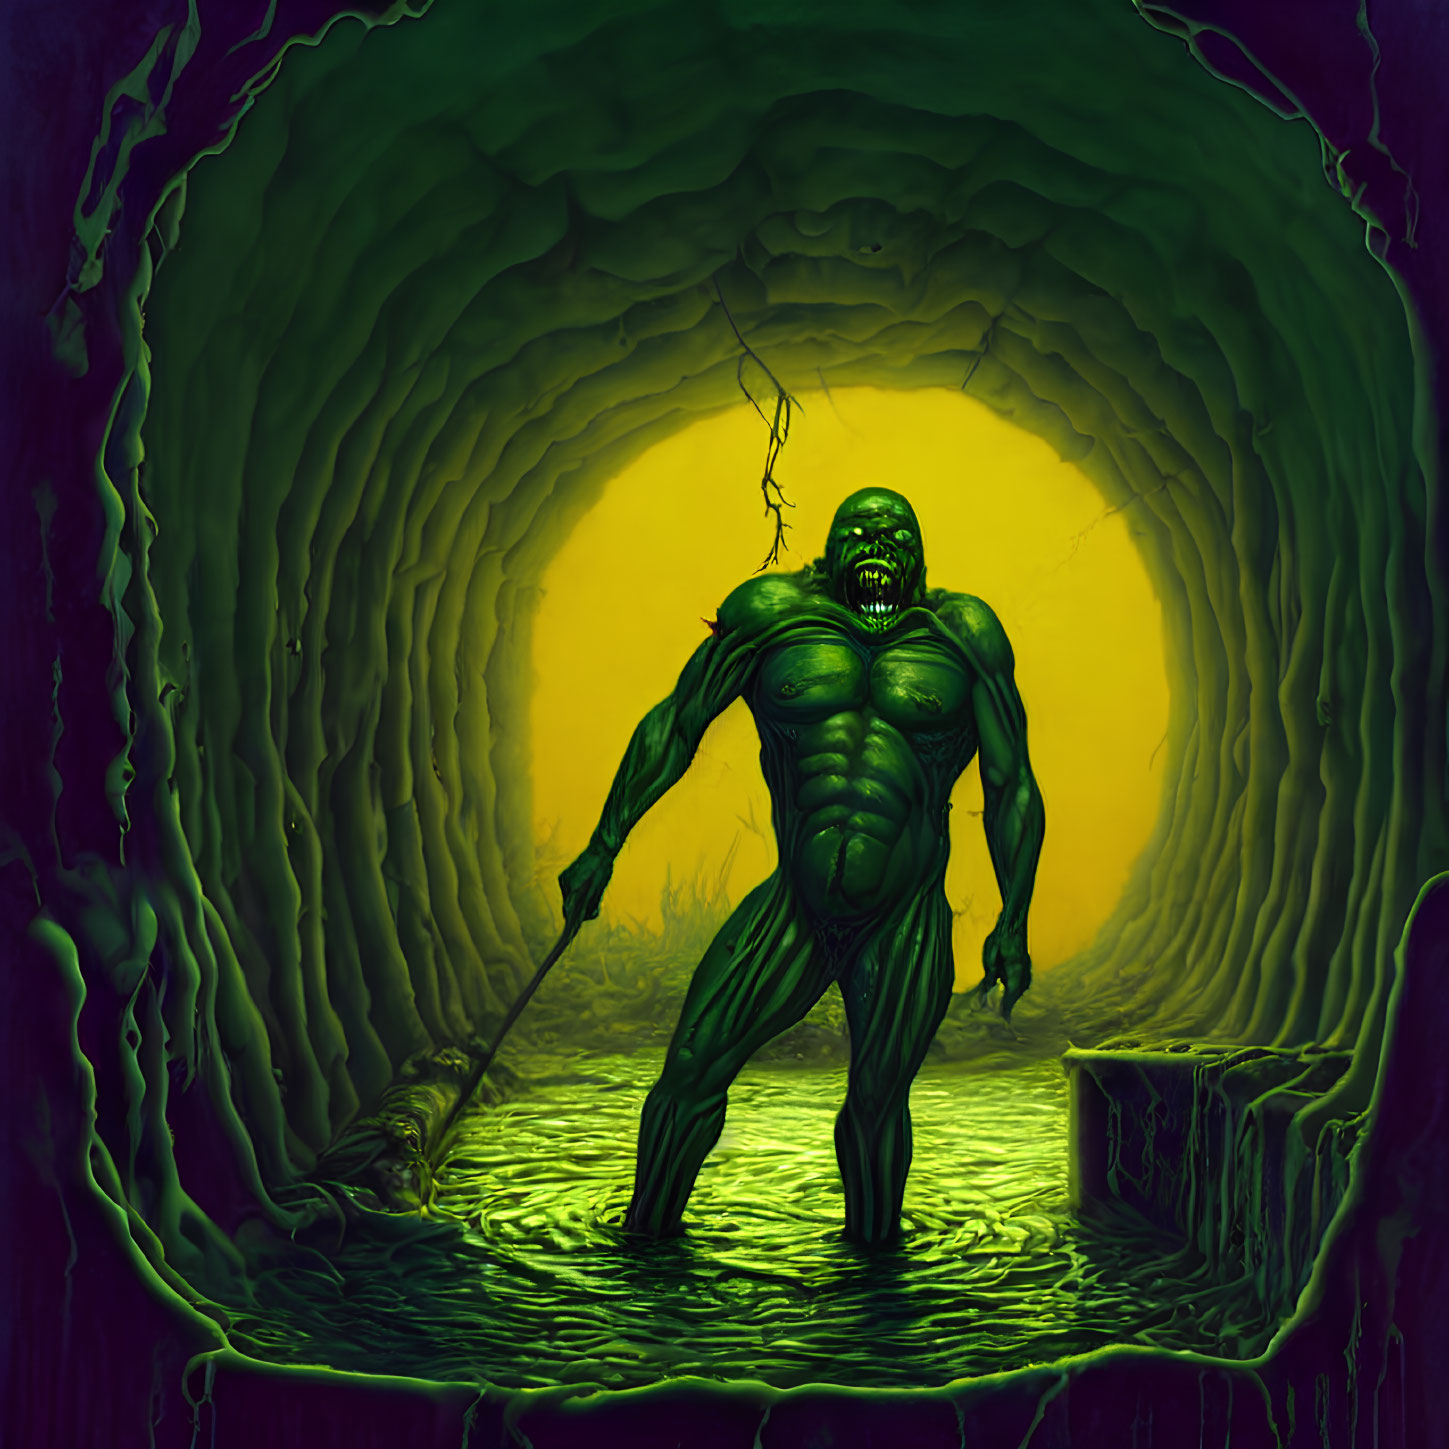 Muscular green creature in eerie cave-like tunnel with yellow glow